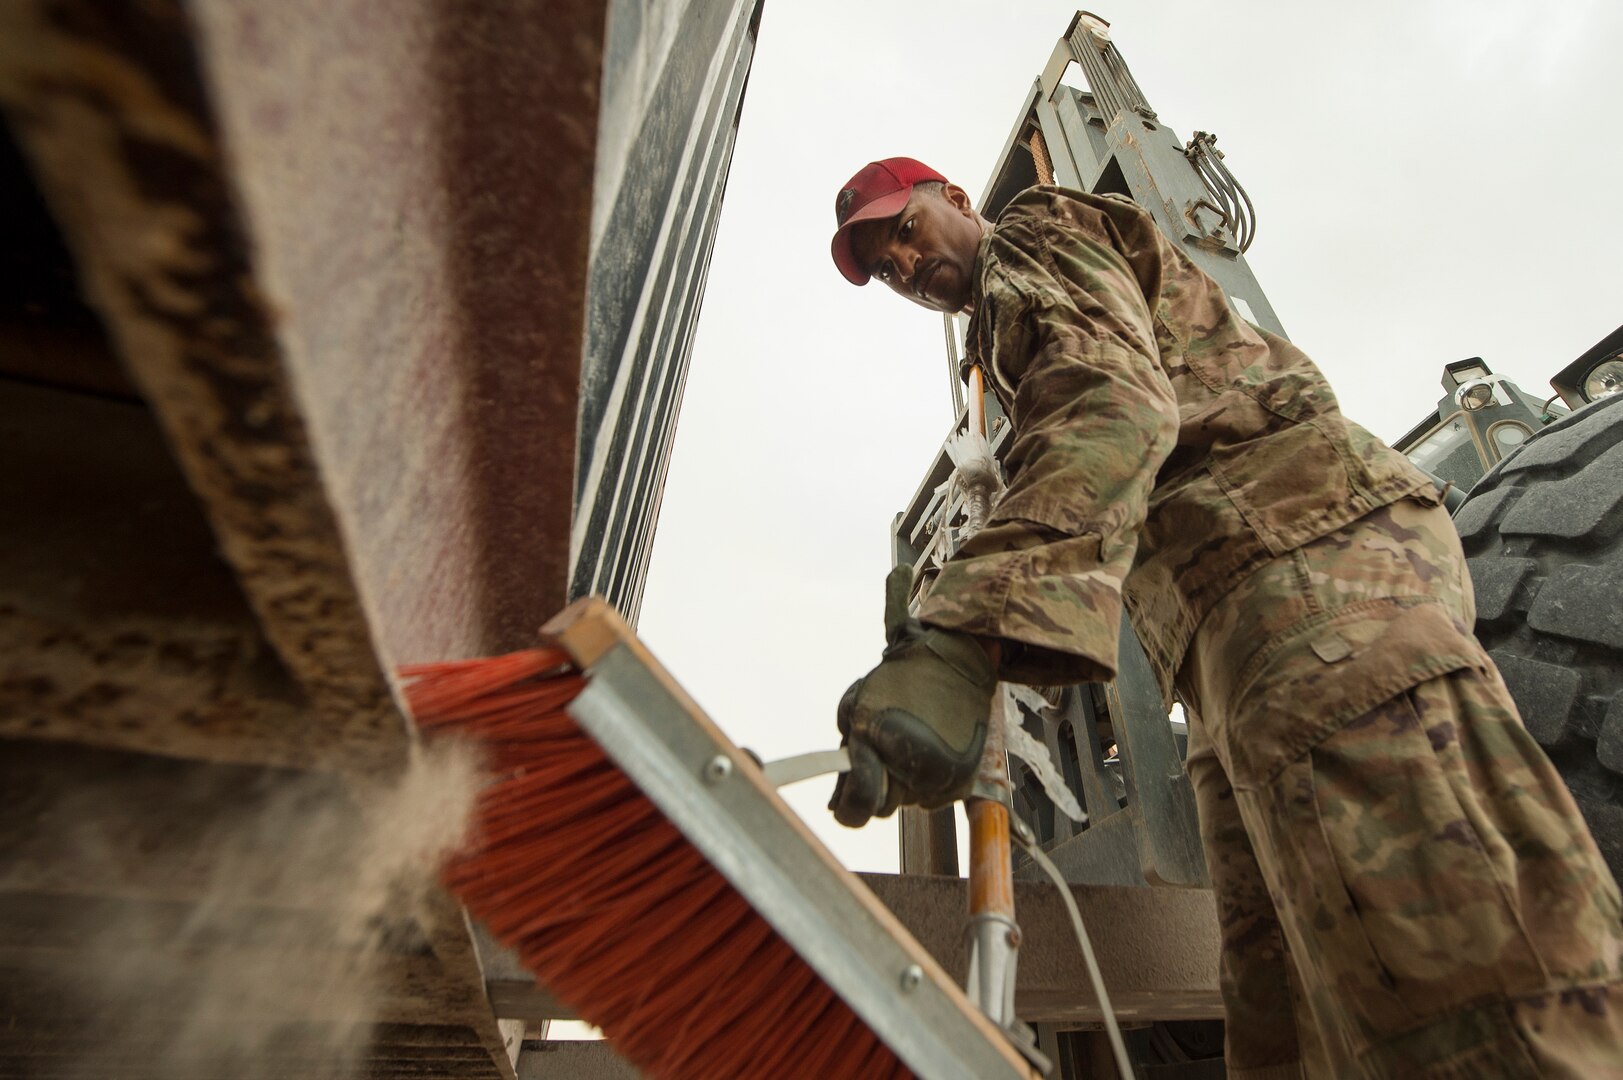 Staff Sgt. Sterling Benford, 557th Expeditionary RED HORSE Squadron supply NCO in charge, sweeps the edges of a large container in preparation for transport at Al Udeid Air Base, Qatar, April 3, 2019. Benford is responsible for the accountability of 1st Expeditionary Civil Engineer Group assets at deployed locations across U.S. Central Command (CENTCOM). Logistics Airmen were vital in the completion of more than 400 construction missions across the CENTCOM Theater during a six-month period. (U.S. Air Force photo by Tech. Sgt. Christopher Hubenthal)